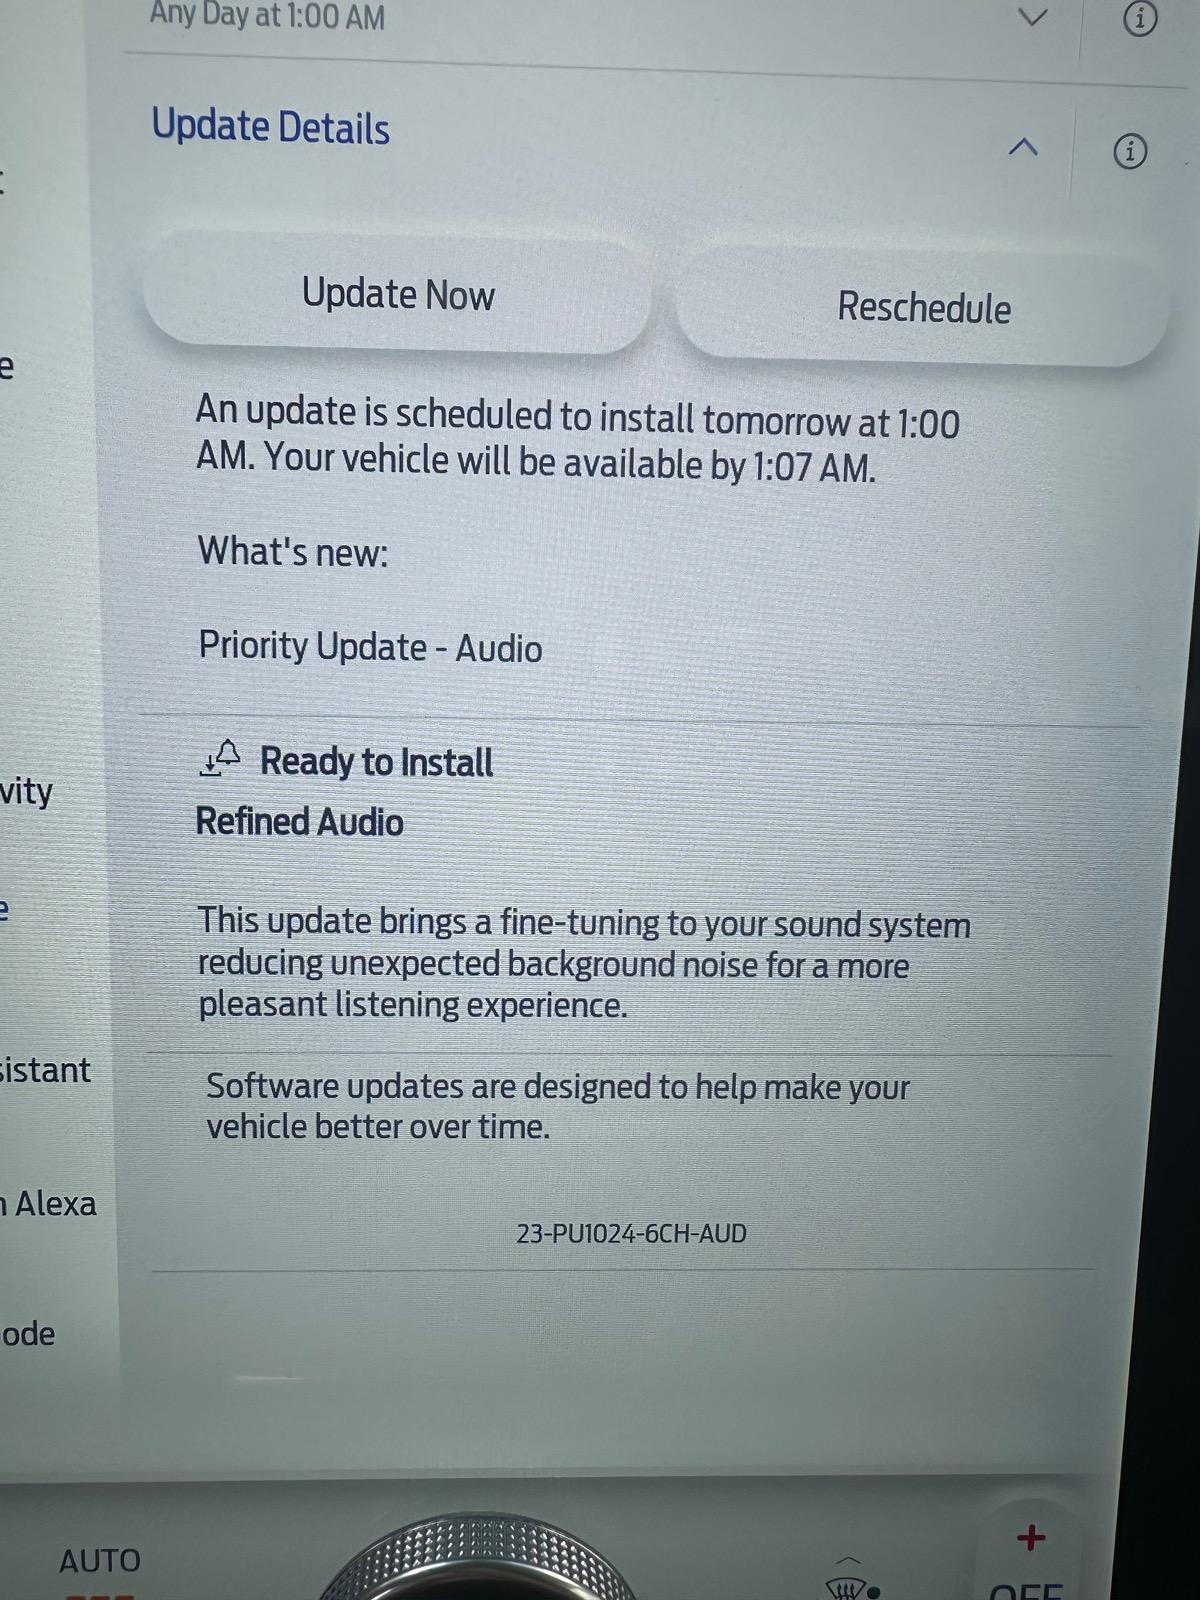 Ford F-150 Lightning Software Priority Update: 23-PU1024-6CH-AUD - Refined Audio IMG_2822